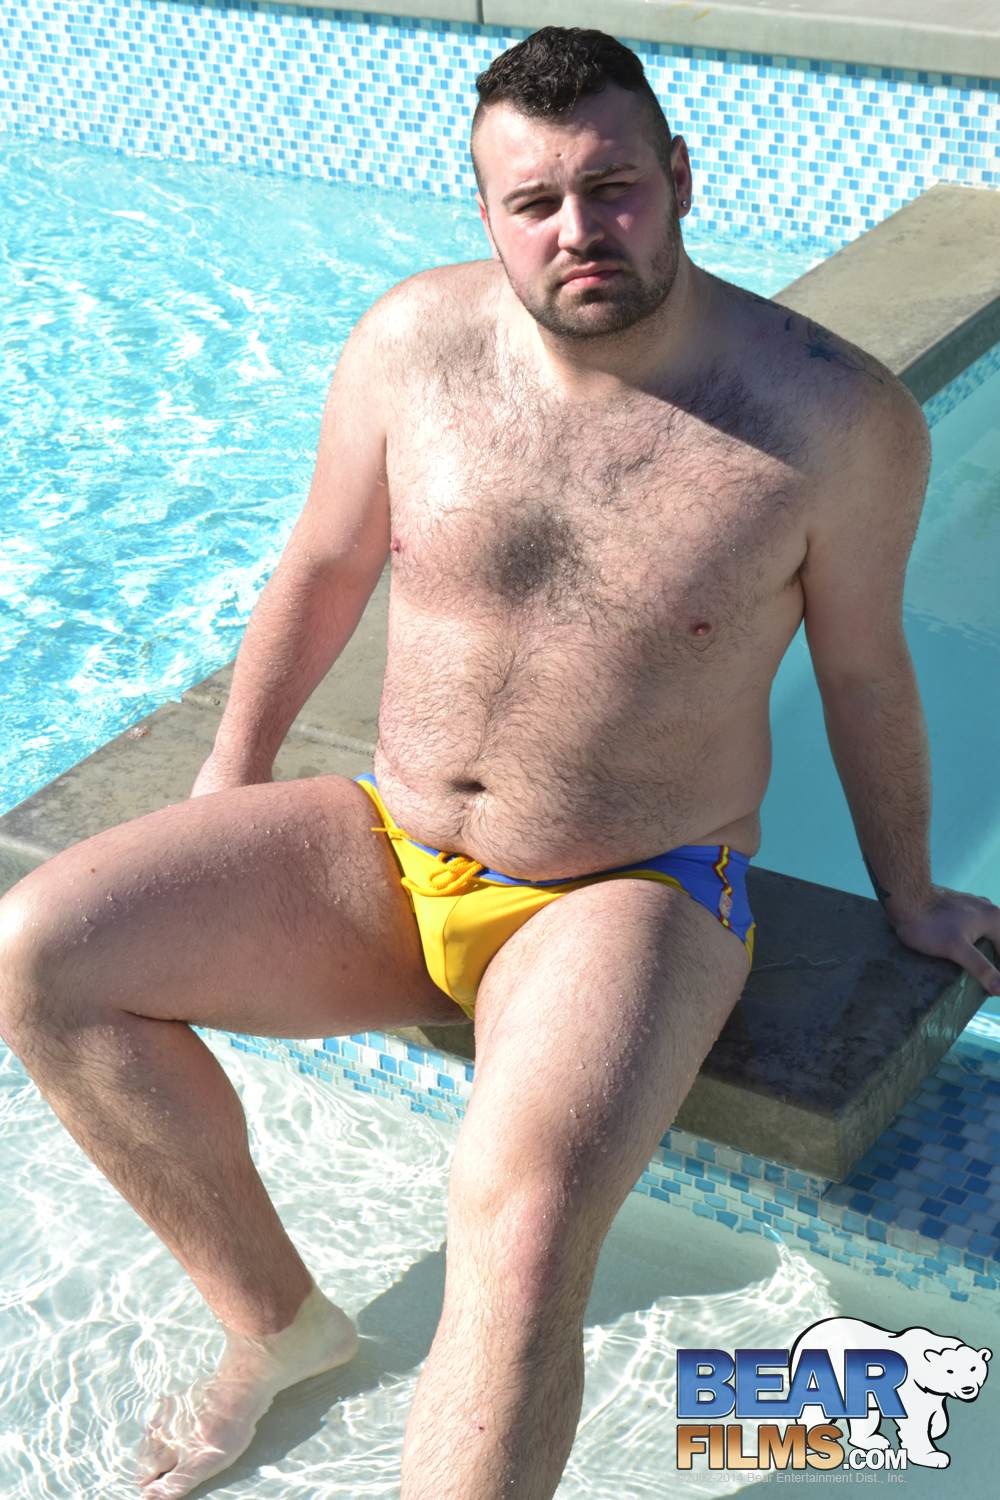 Rex Blue poses in a speedo for gay porn site Bear Films.